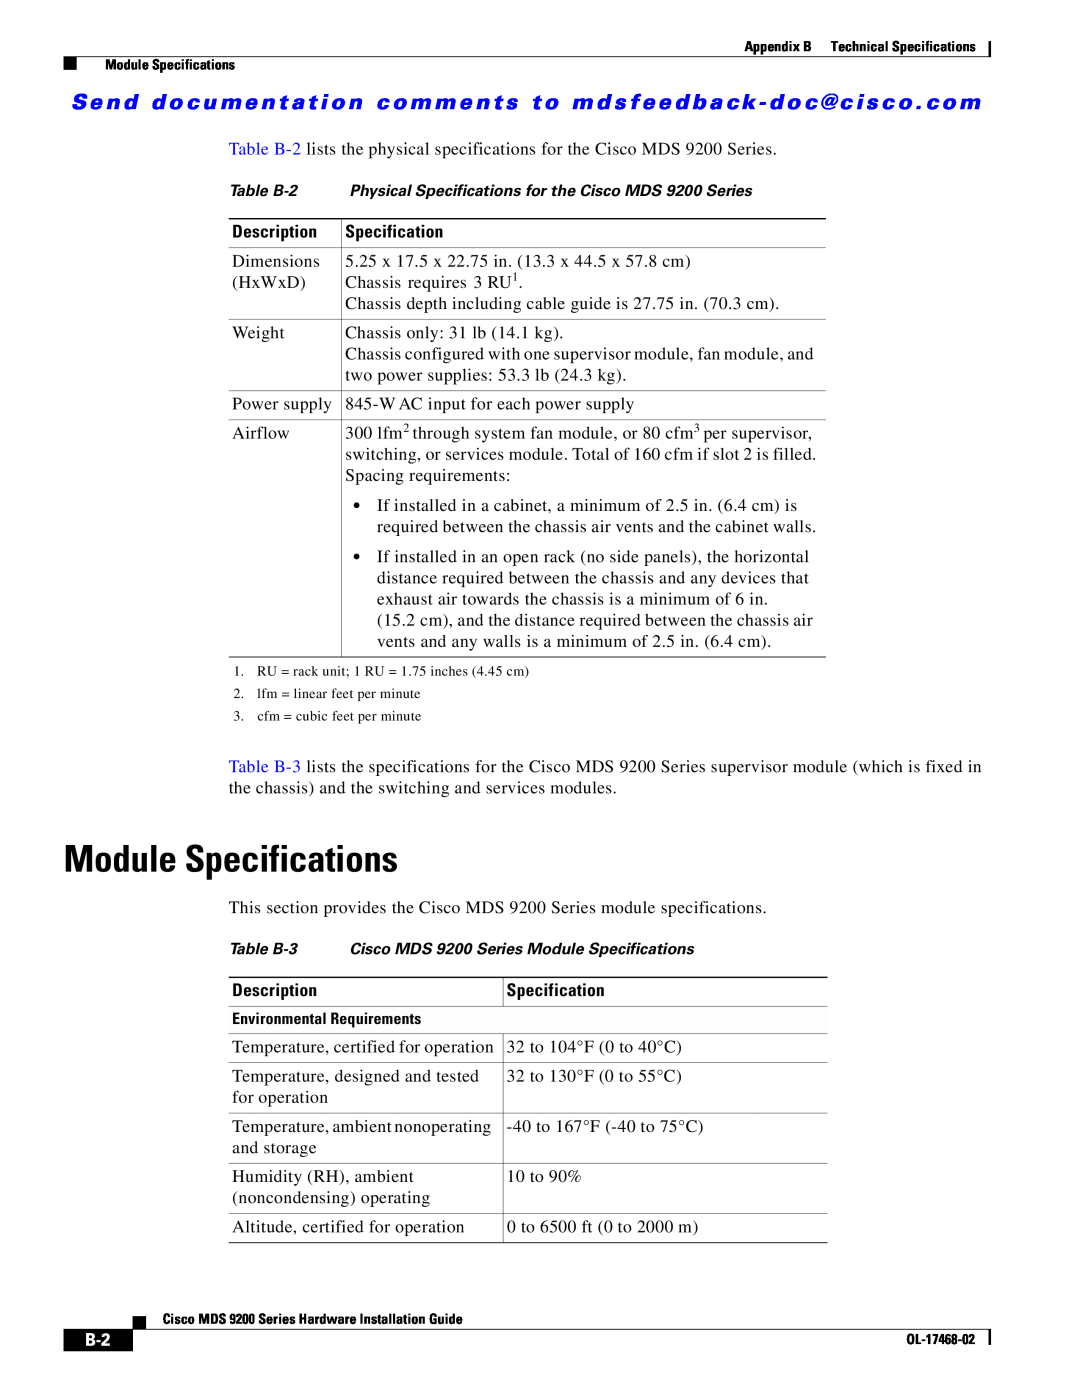 Cisco Systems MDS 9200 Series manual Module Specifications 